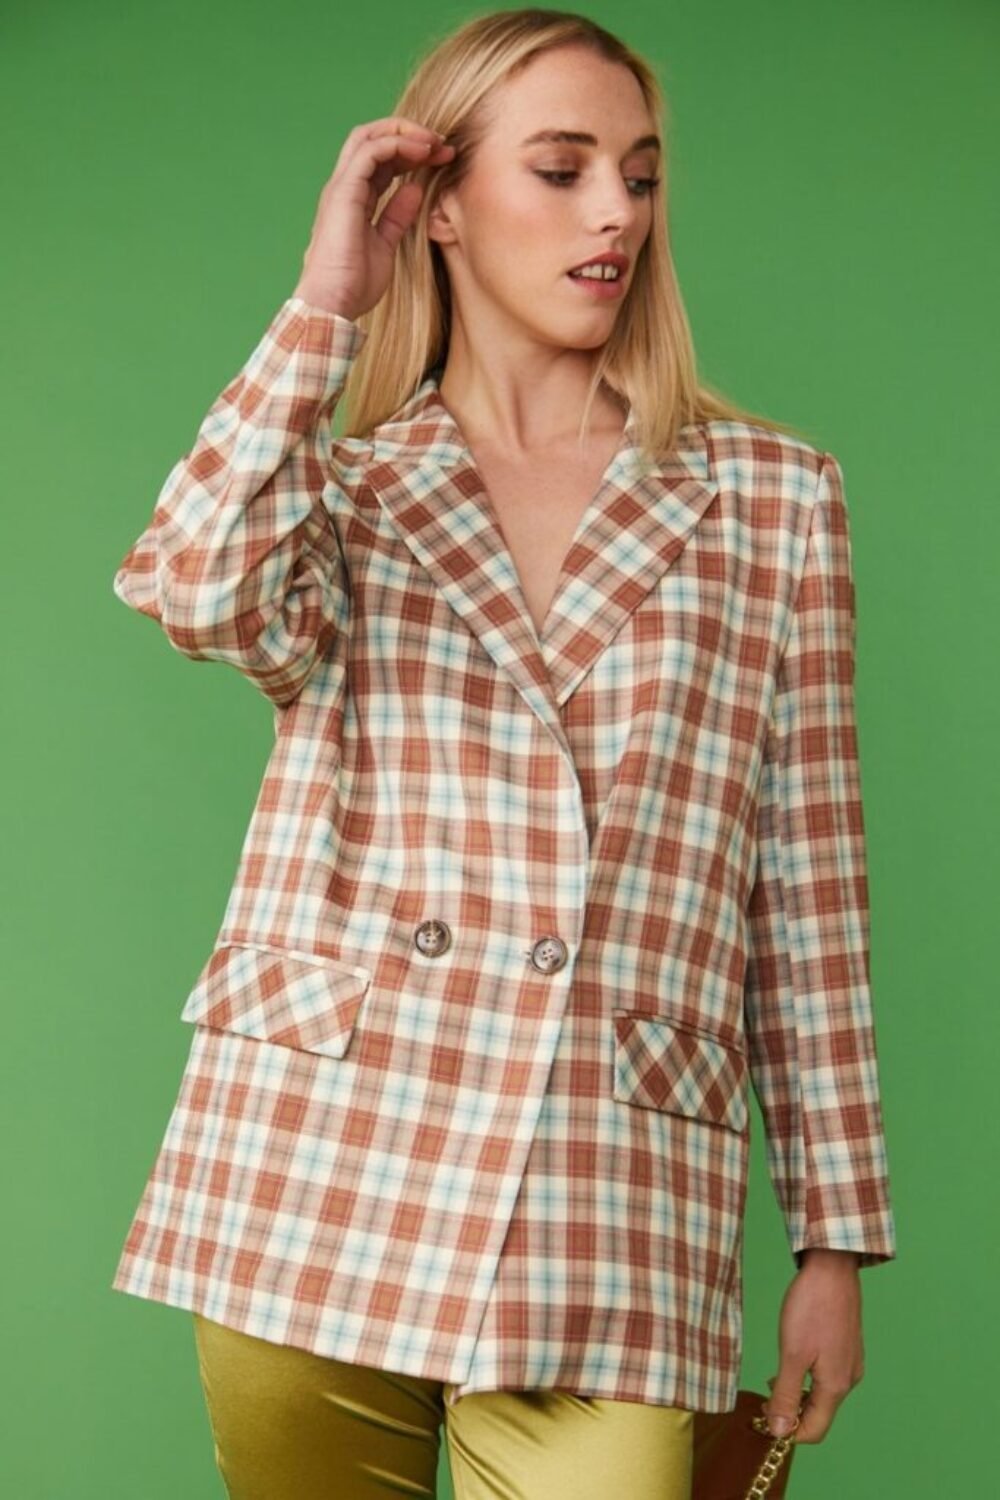 Shop Lux Checkered Blazer Jacket and women's luxury and designer clothes at www.lux-apparel.co.uk